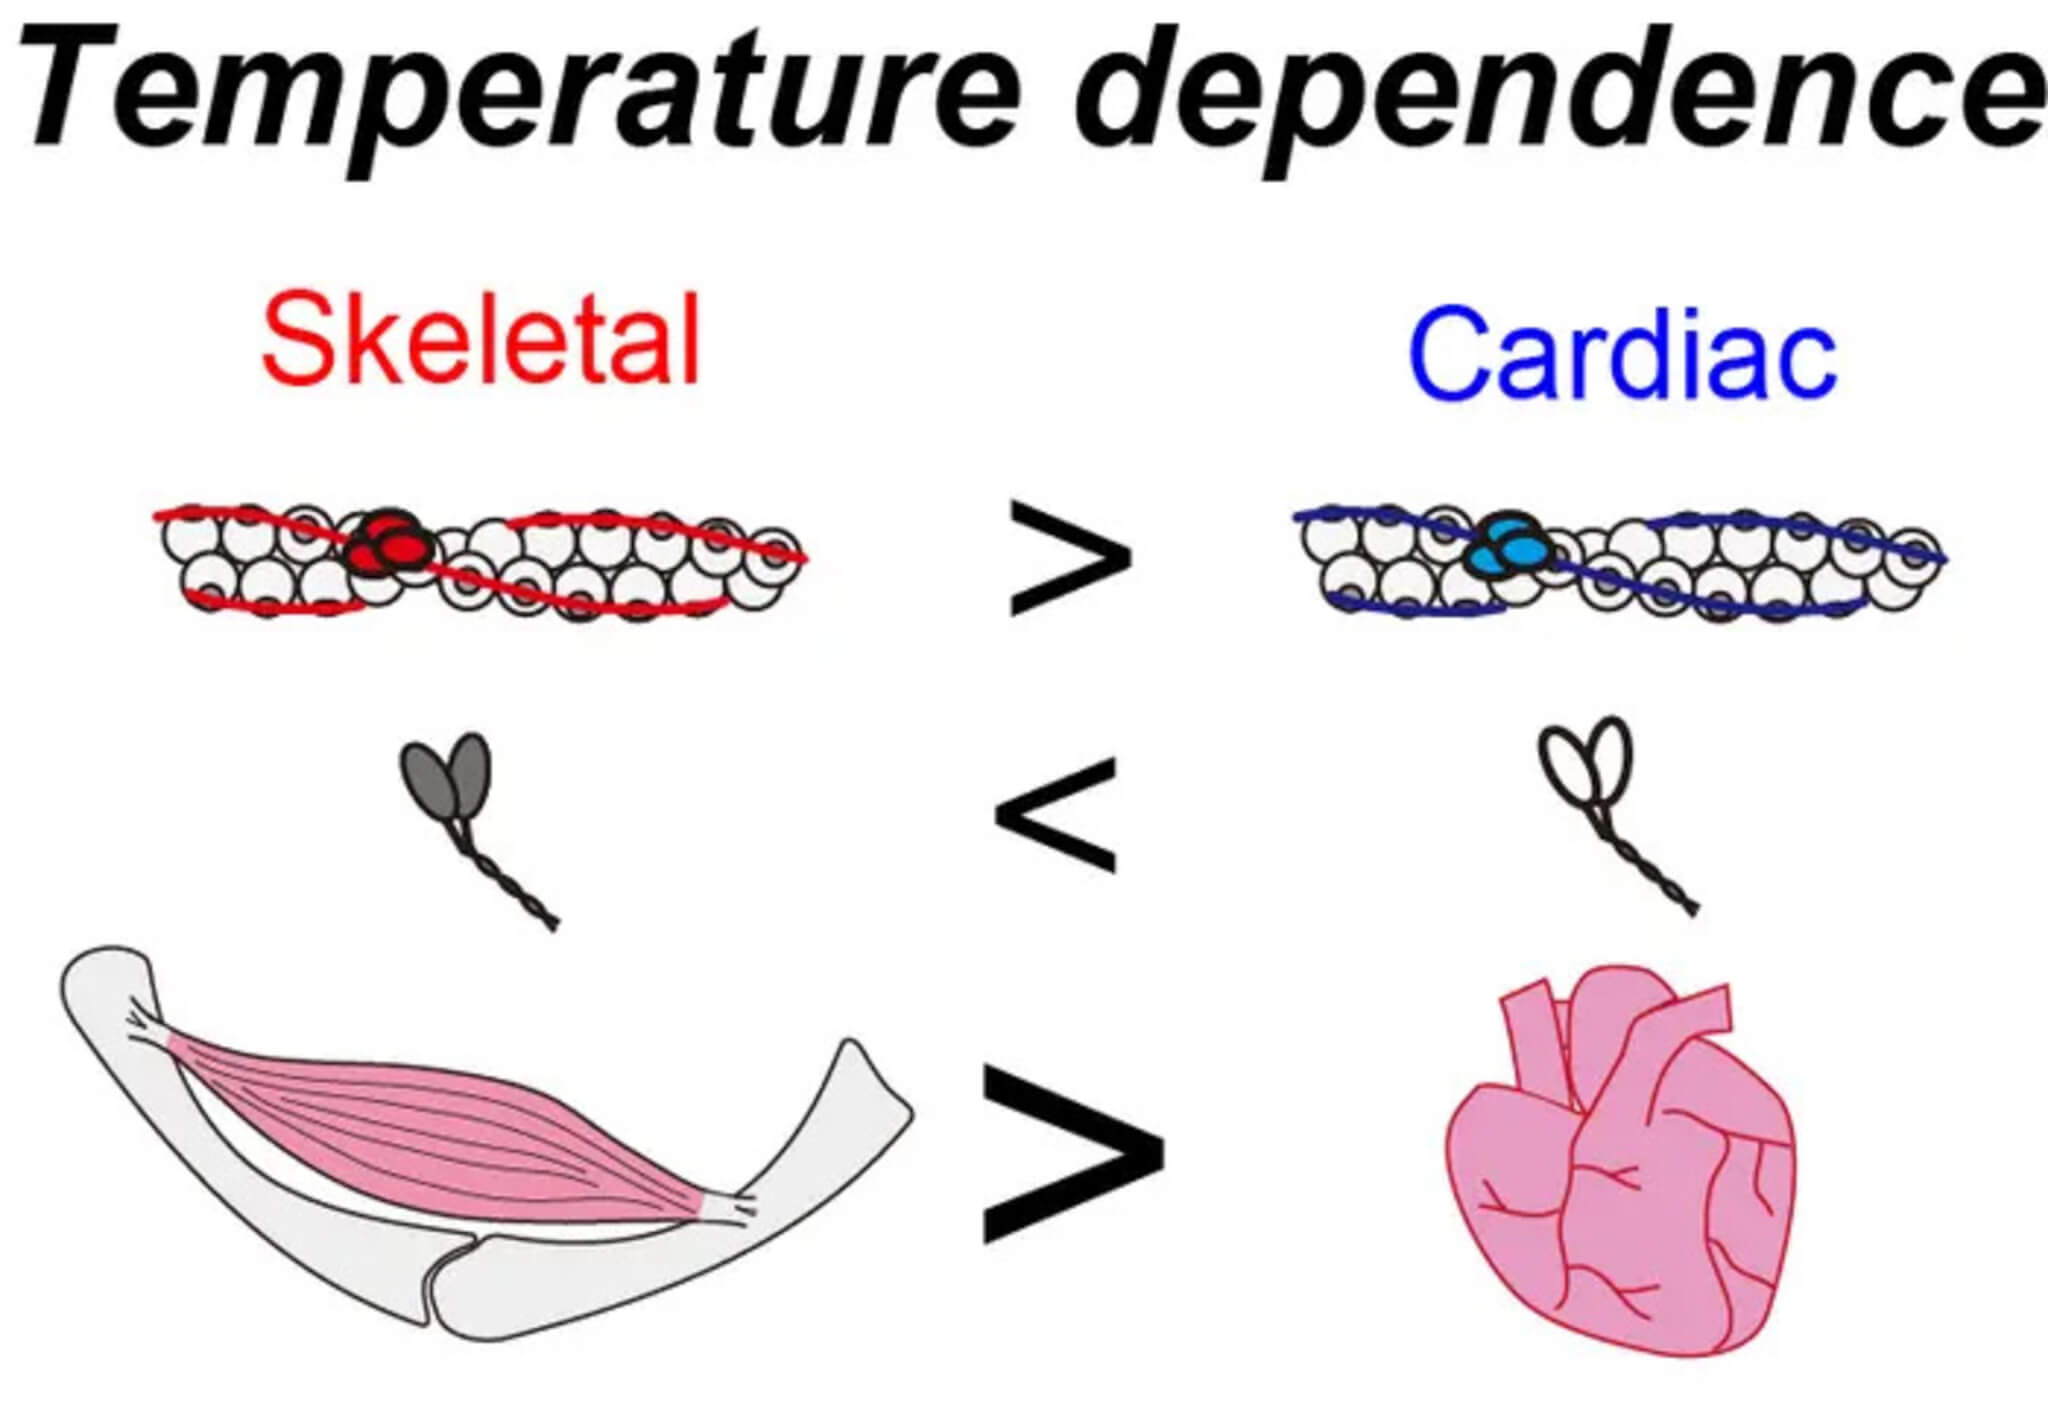 Contractile proteins of skeletal and cardiac muscle have different temperature dependence